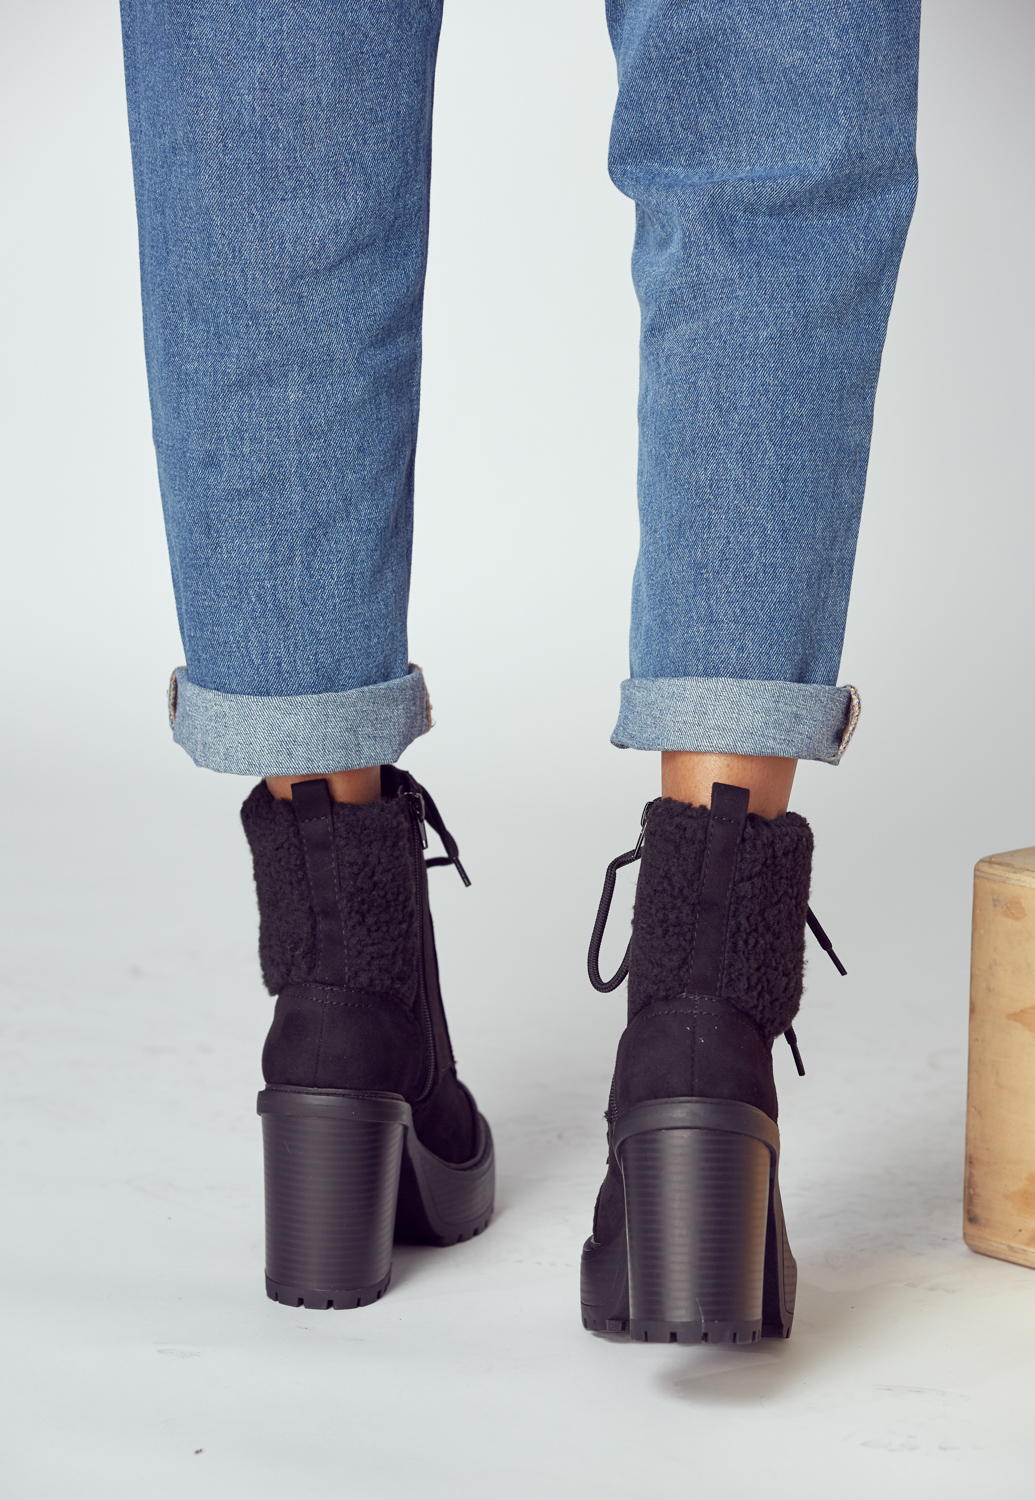 Shearling Lace-Up High Heel Boots